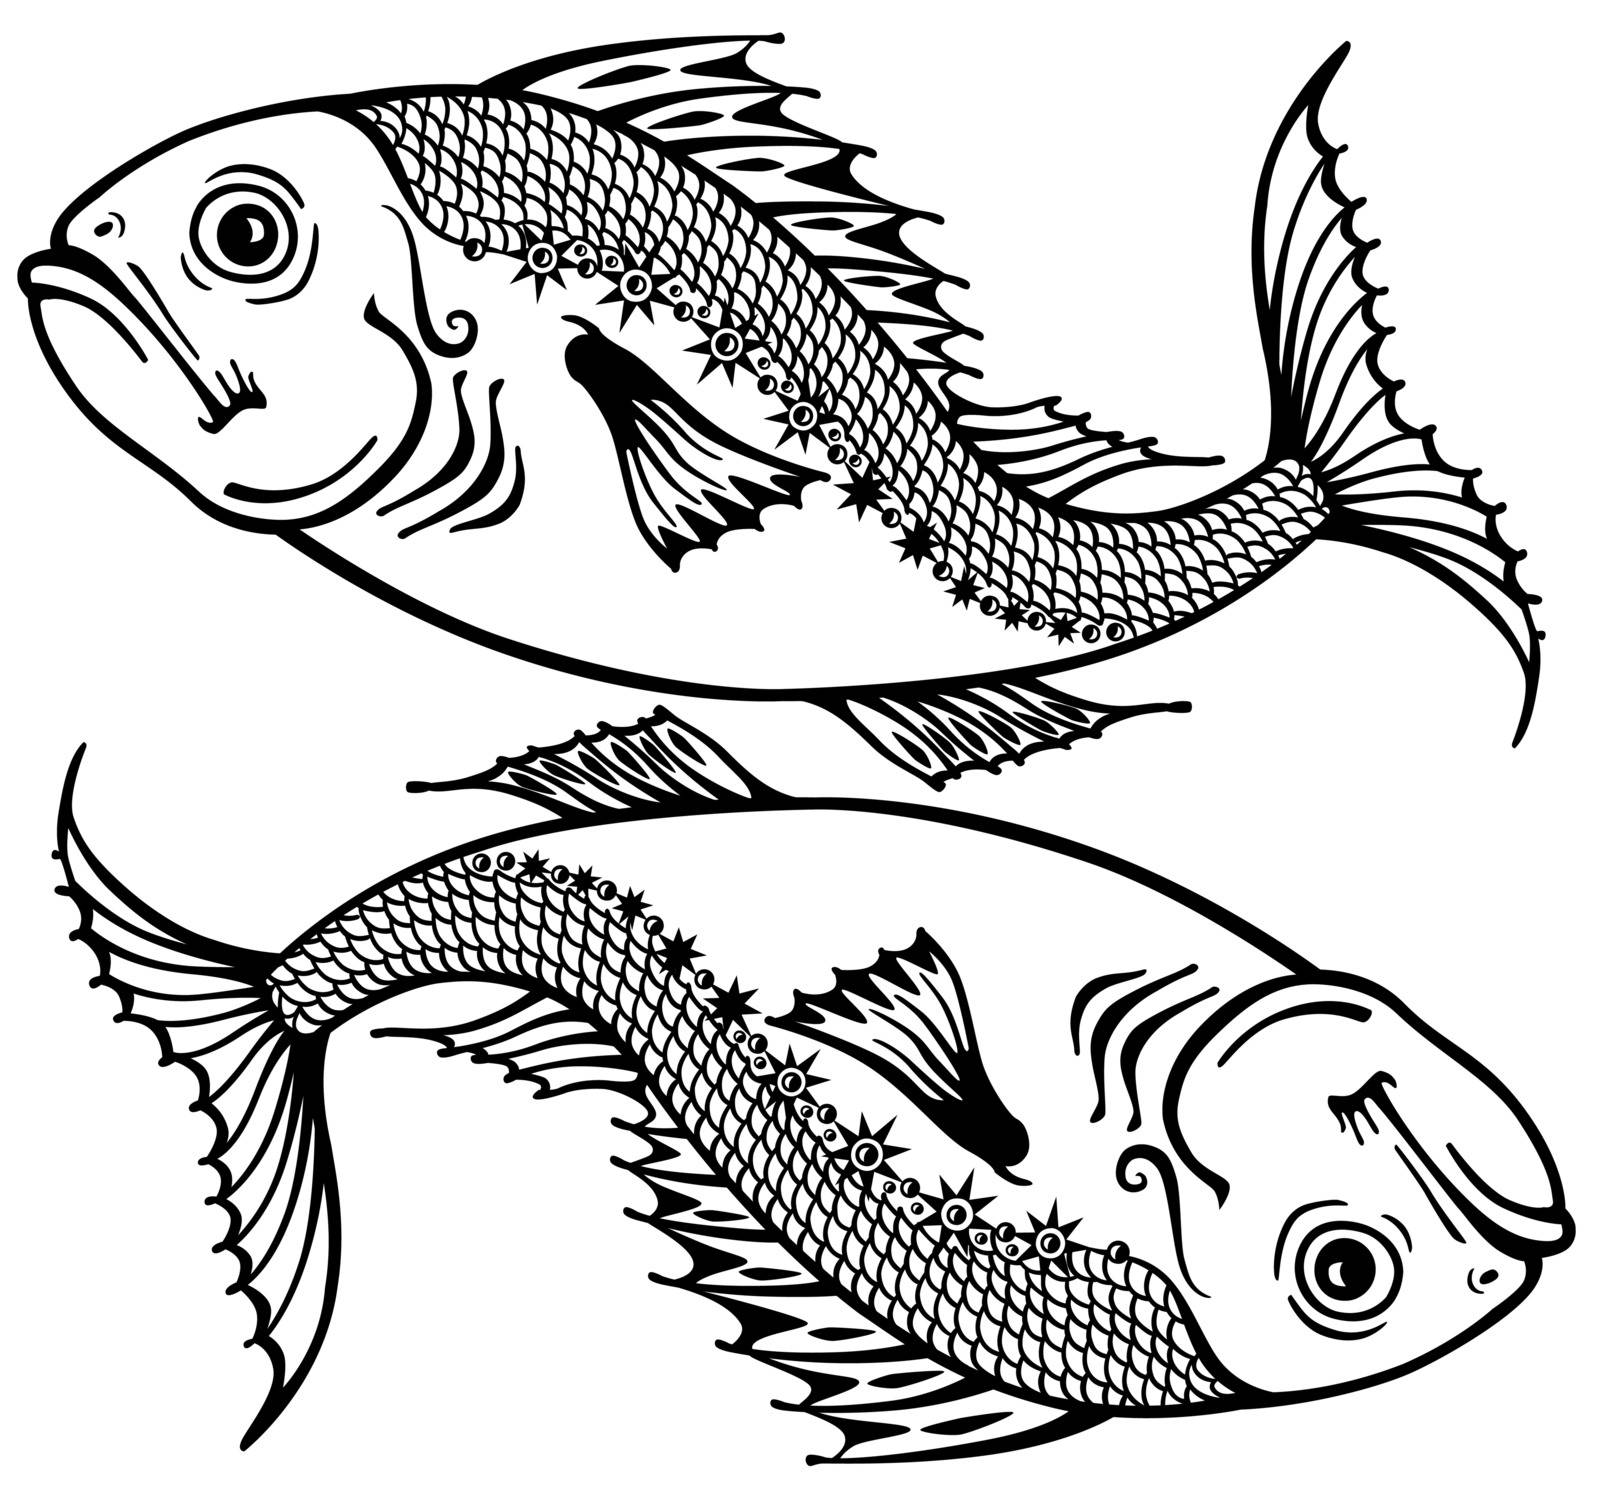 pisces astrological zodiac sign, black and white image